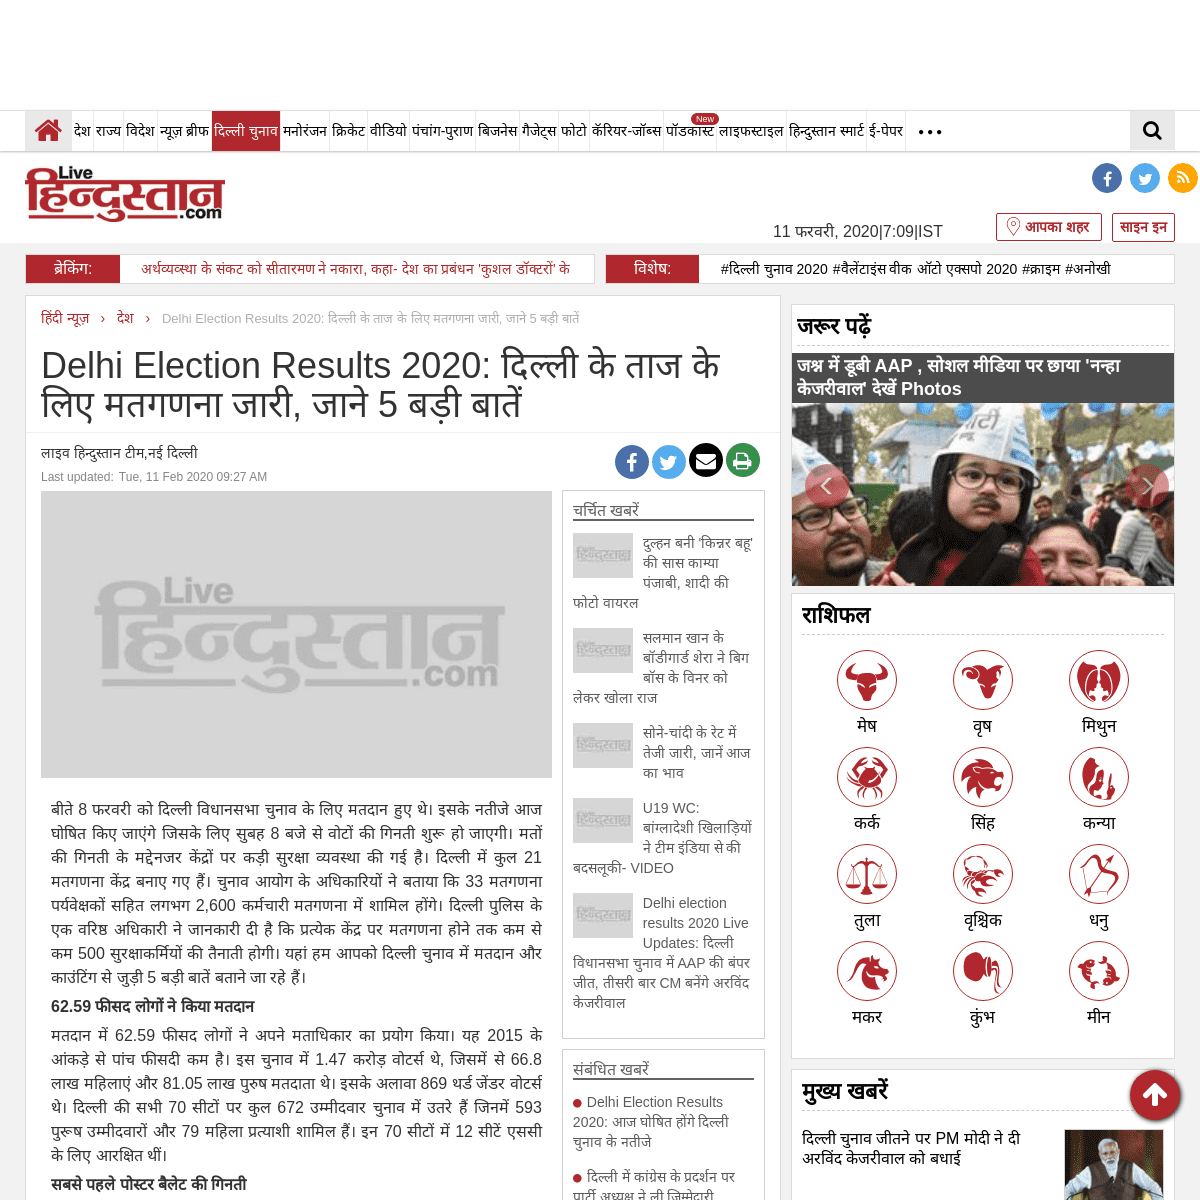 A complete backup of www.livehindustan.com/national/story-delhi-election-results-2020-to-be-declared-today-know-the-10-important